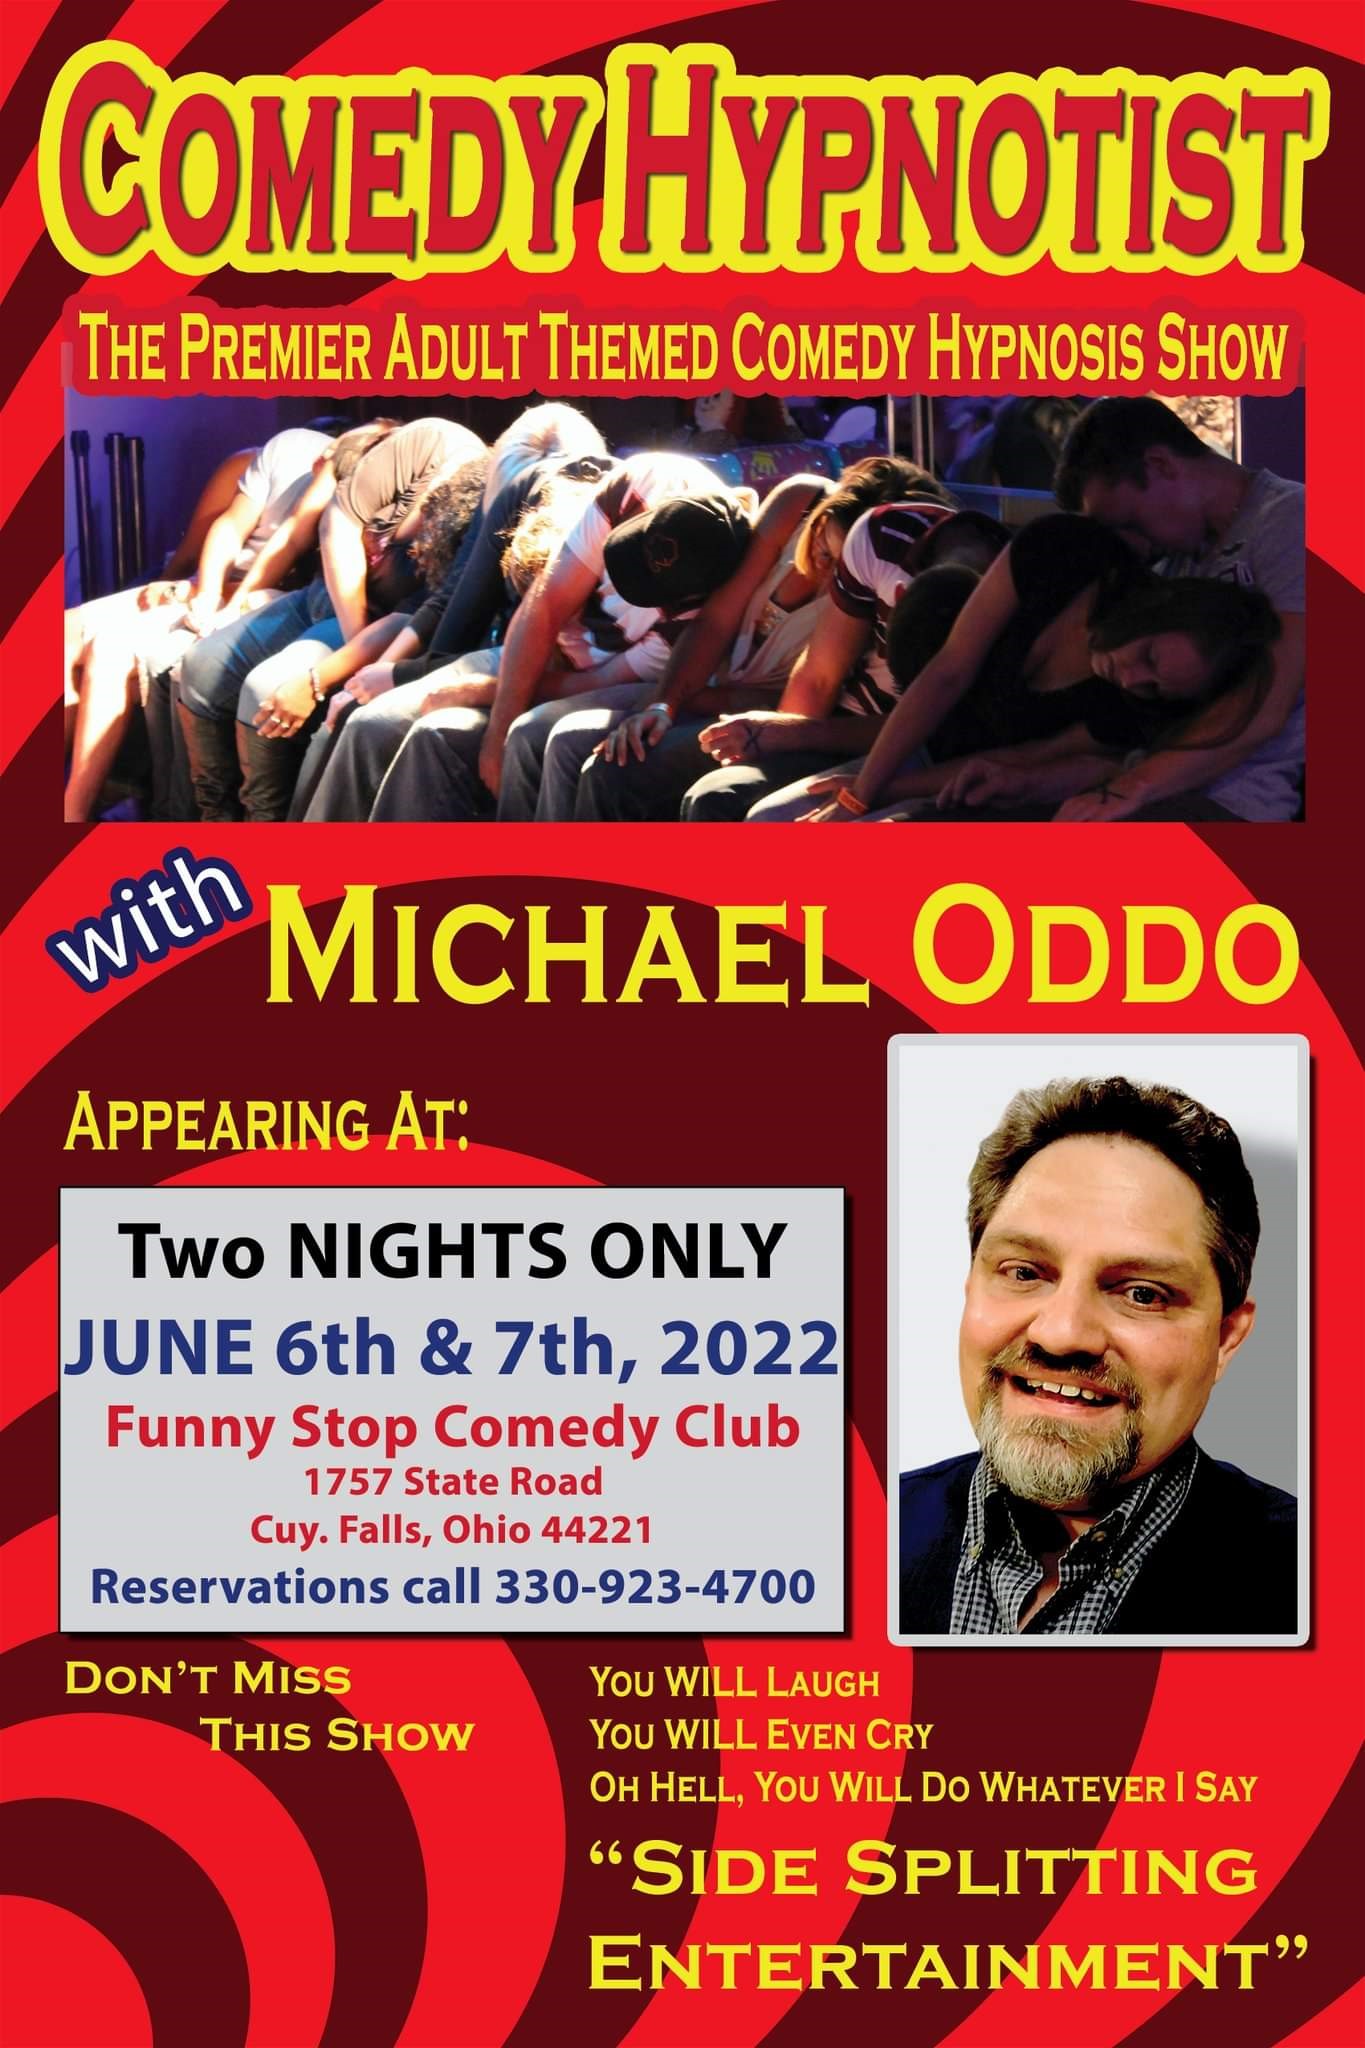 Michael Oddo 8 PM Show Funny Stop Comedy Club on Jun 07, 20:00@Funny Stop Comedy Club - Buy tickets and Get information on Funny Stop funnystop.online